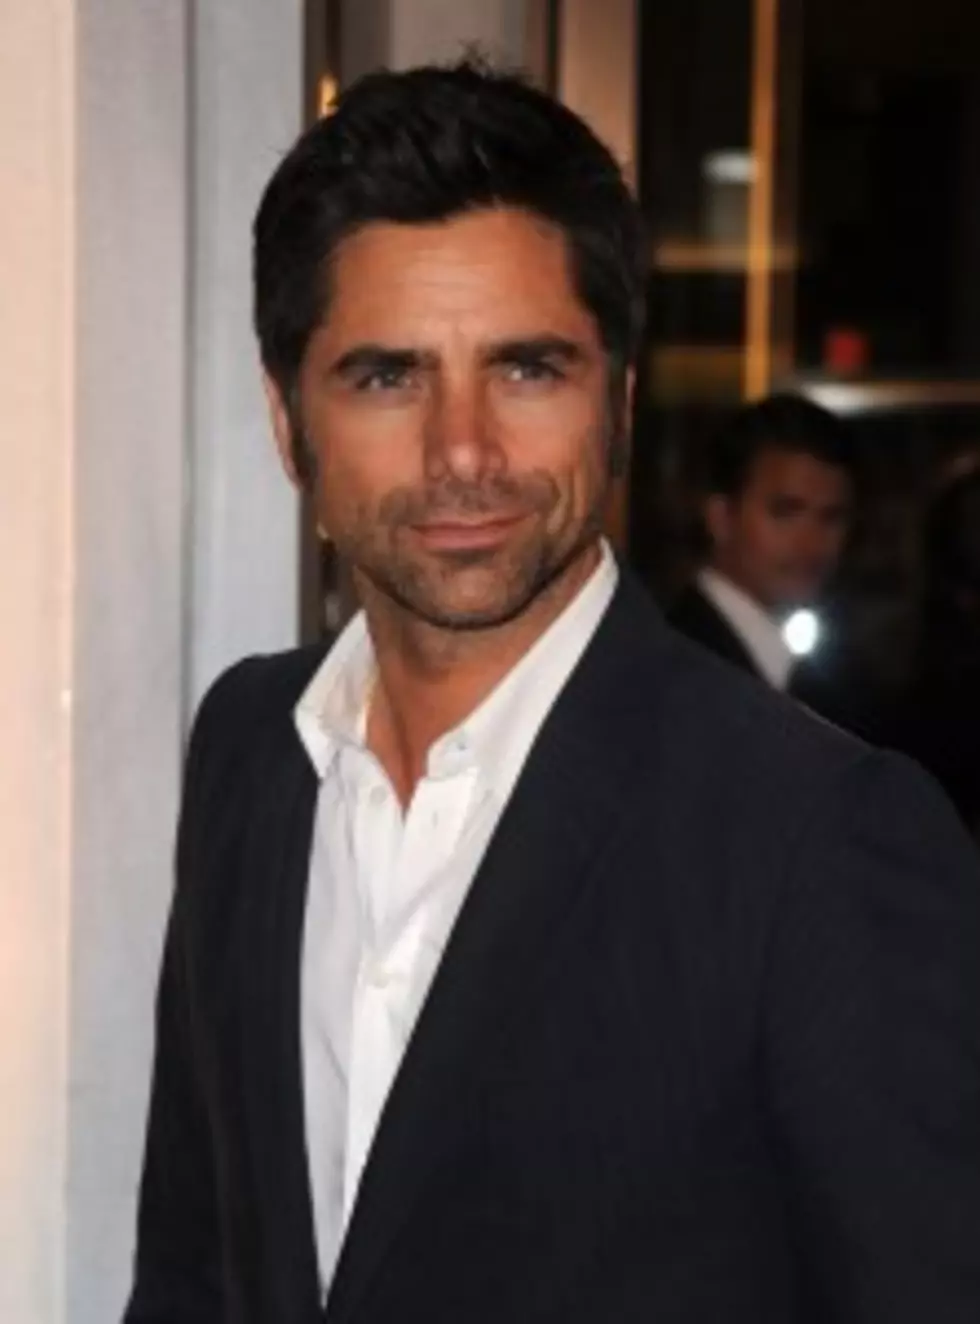 John Stamos to replace Charlie Sheen?